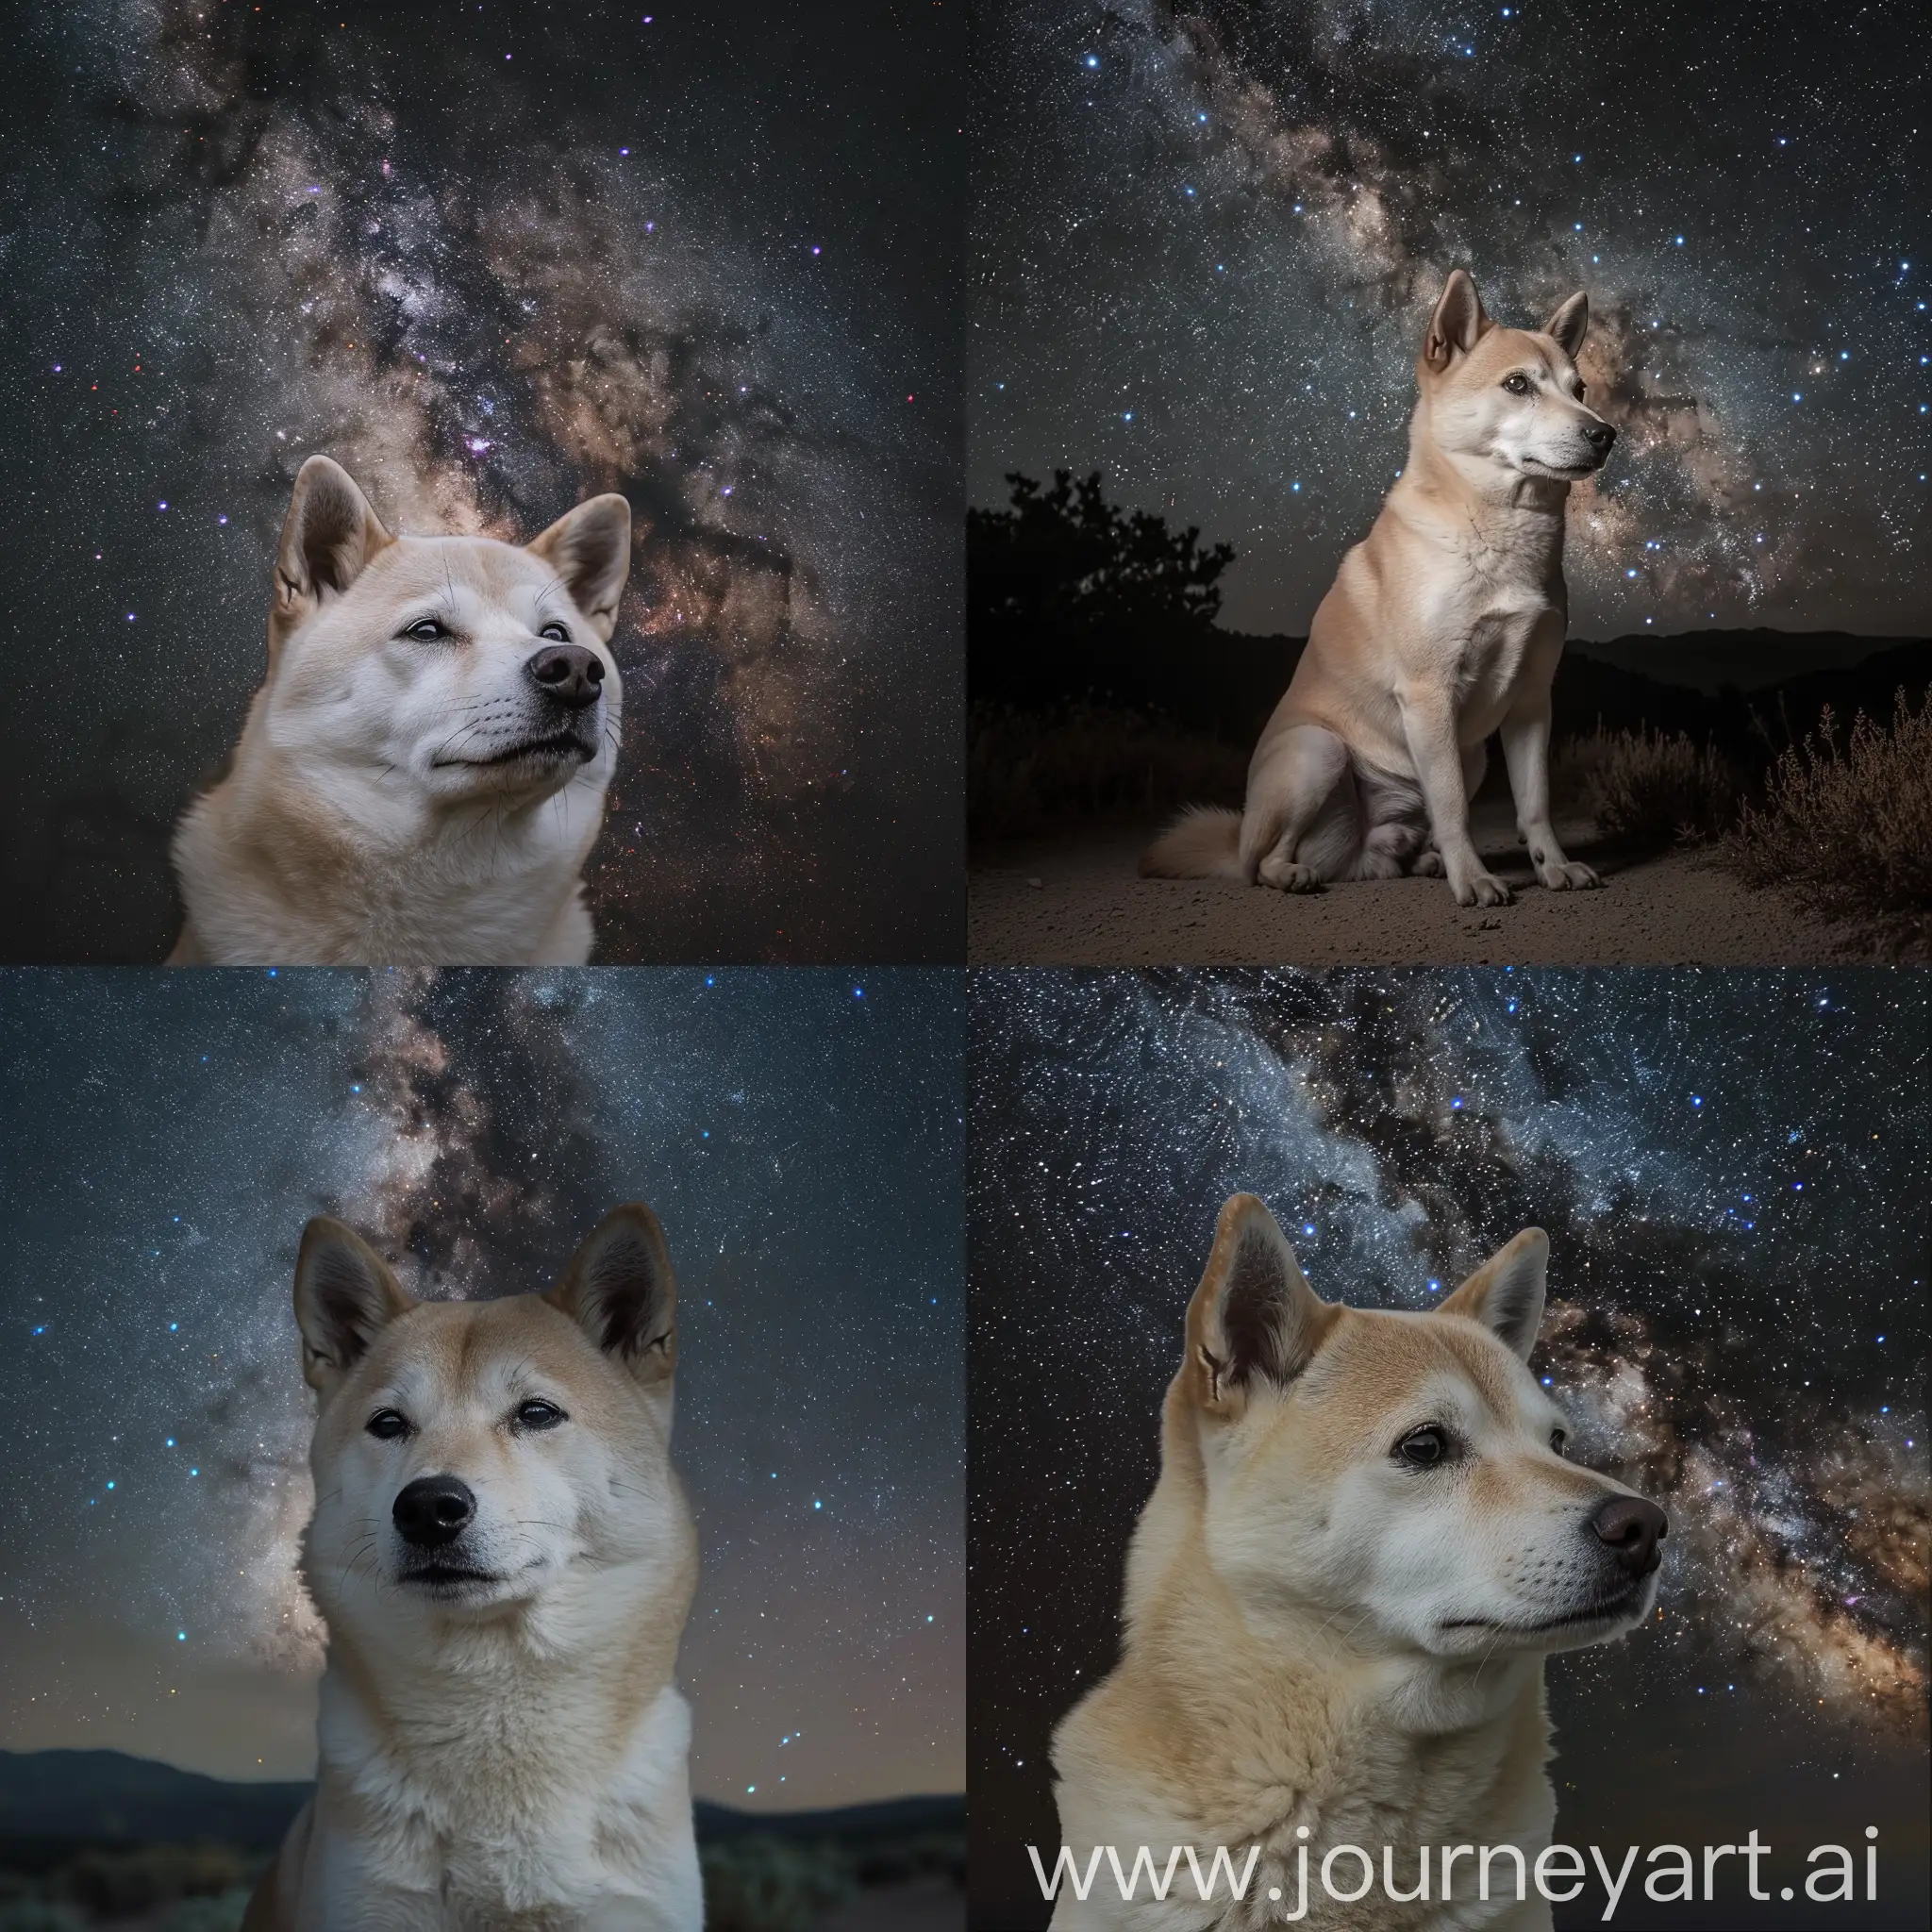 Midway through the Milky Way hiking trail, a cream-colored Shiba Inu pauses, its expression unusually serious. The vastness of space surrounds the trail, with the Milky Way shimmering overhead. The Shiba Inu, known for its spirited nature, seems contemplative, as if pondering the mysteries of the cosmos. Its gaze is fixed on a distant star, adding an ethereal quality to the serene, otherworldly scene — ar 16:9